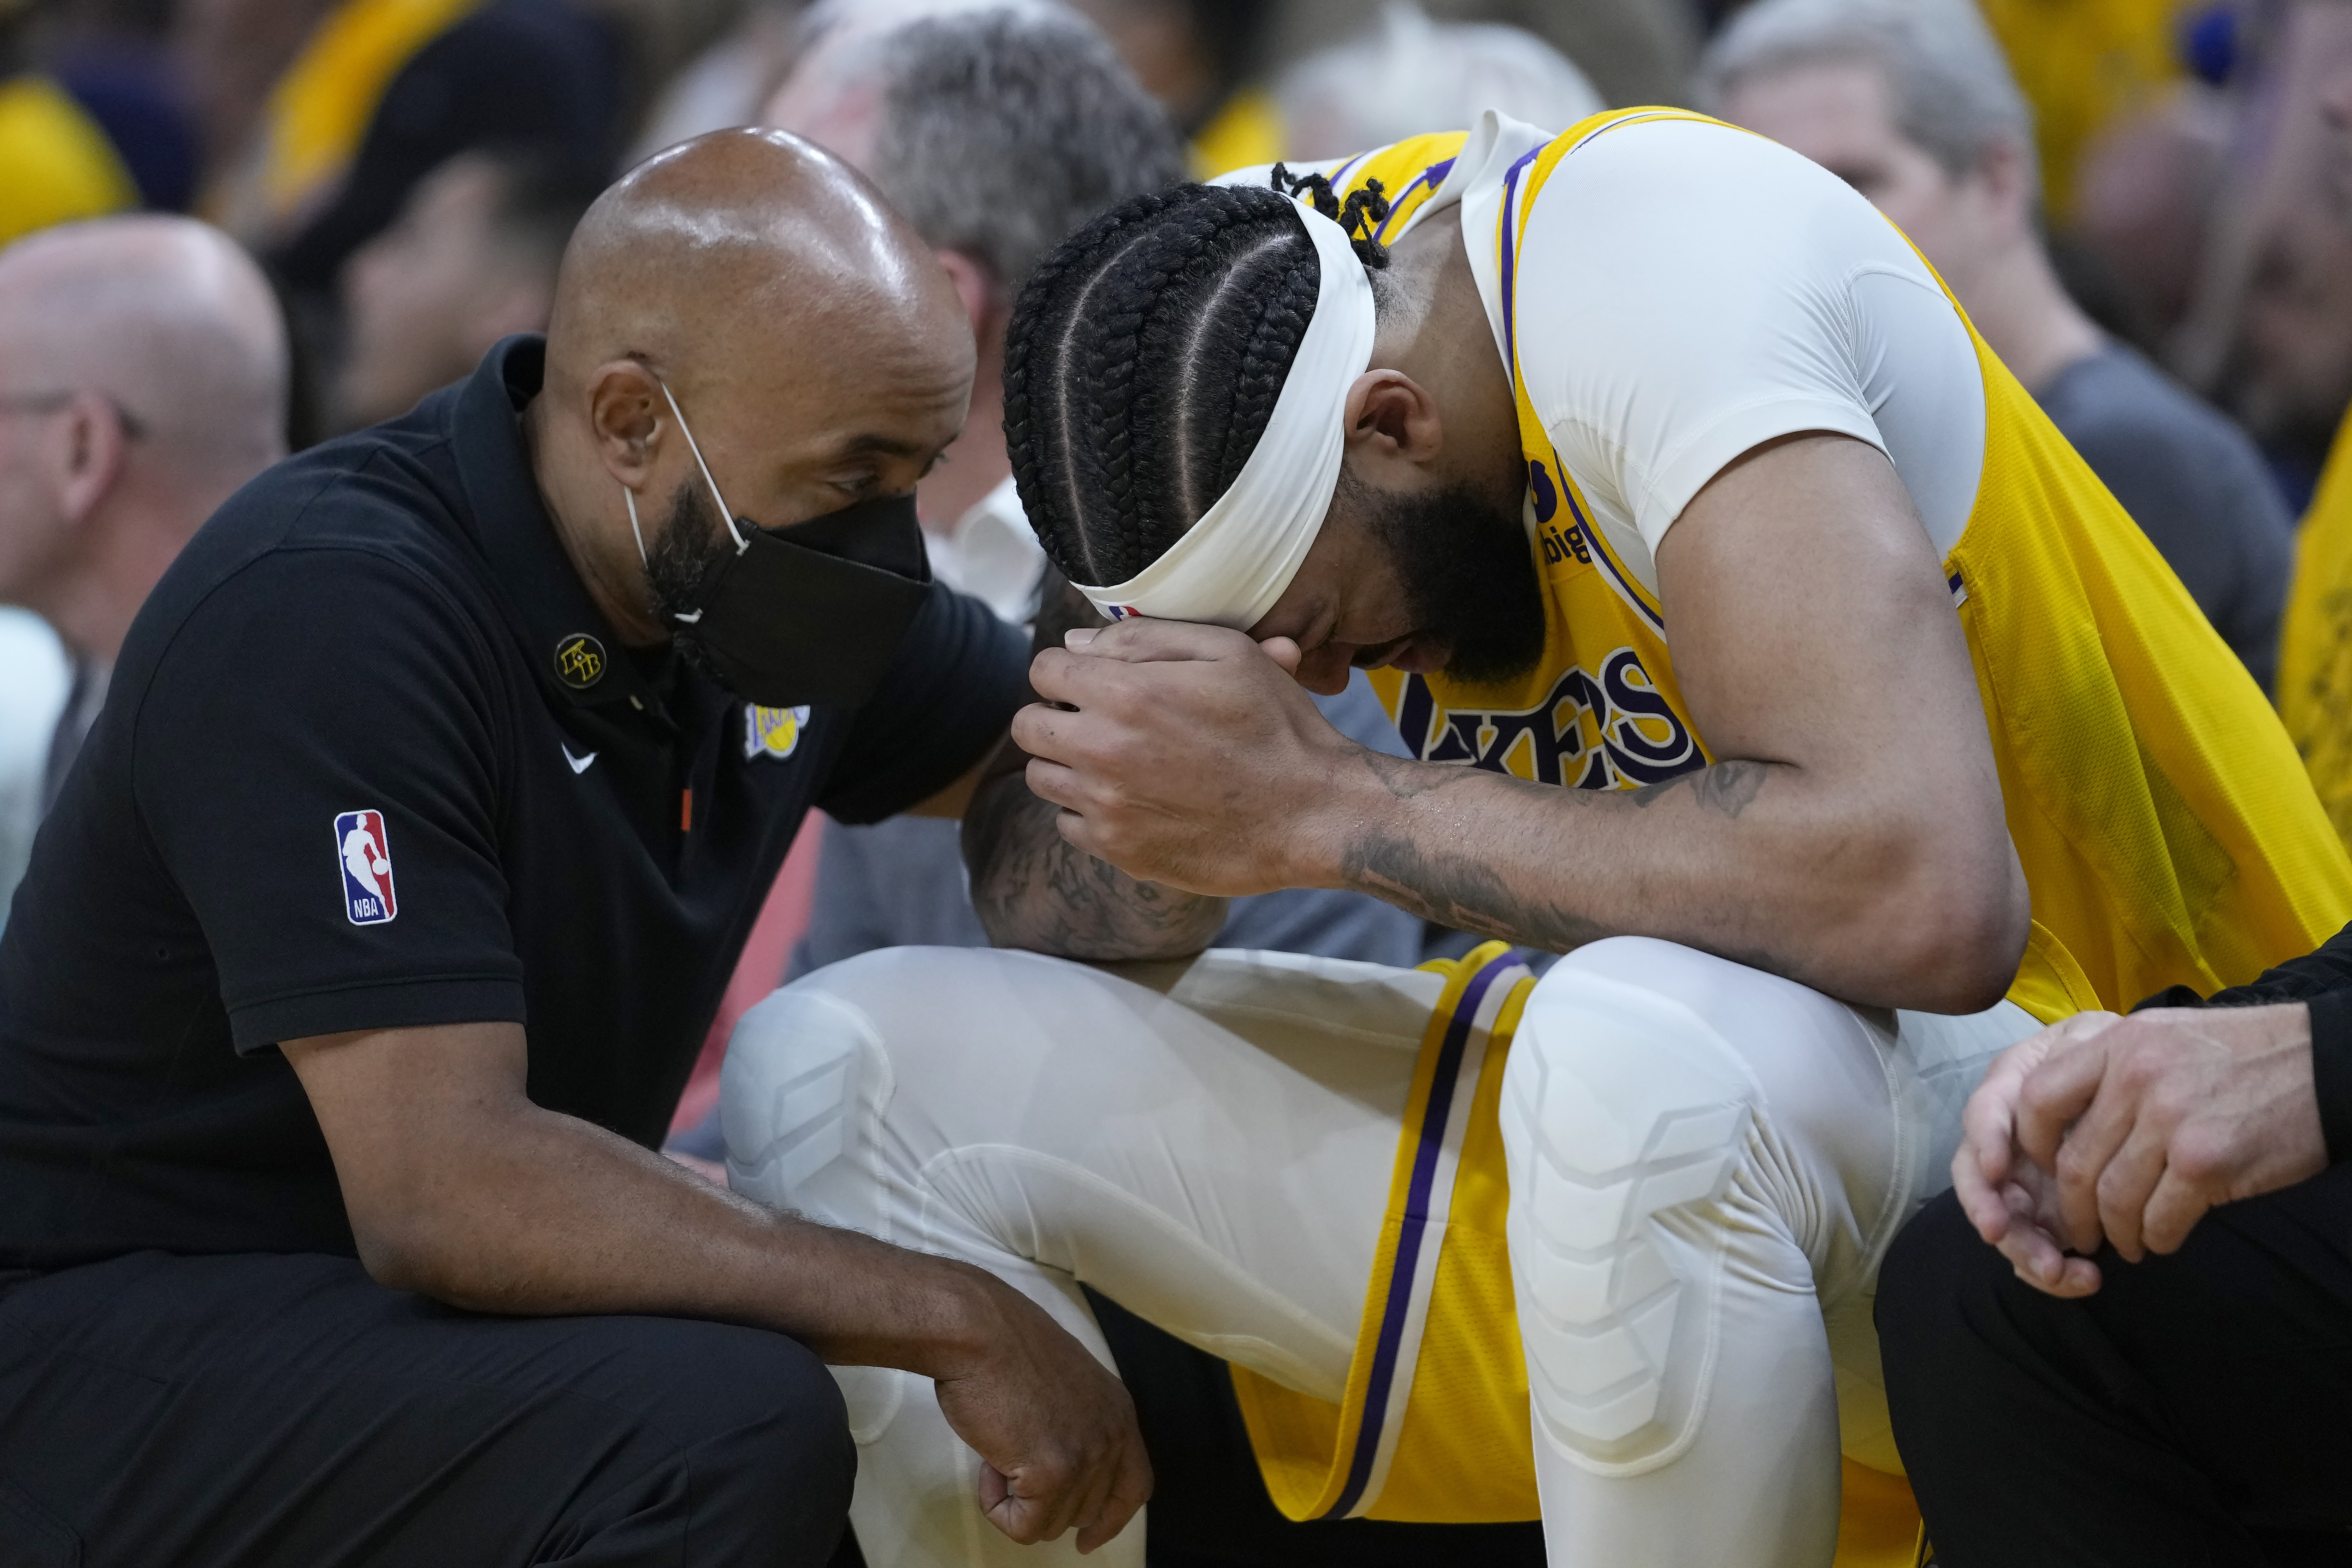 Anthony Davis expected to play on opening night for Lakers